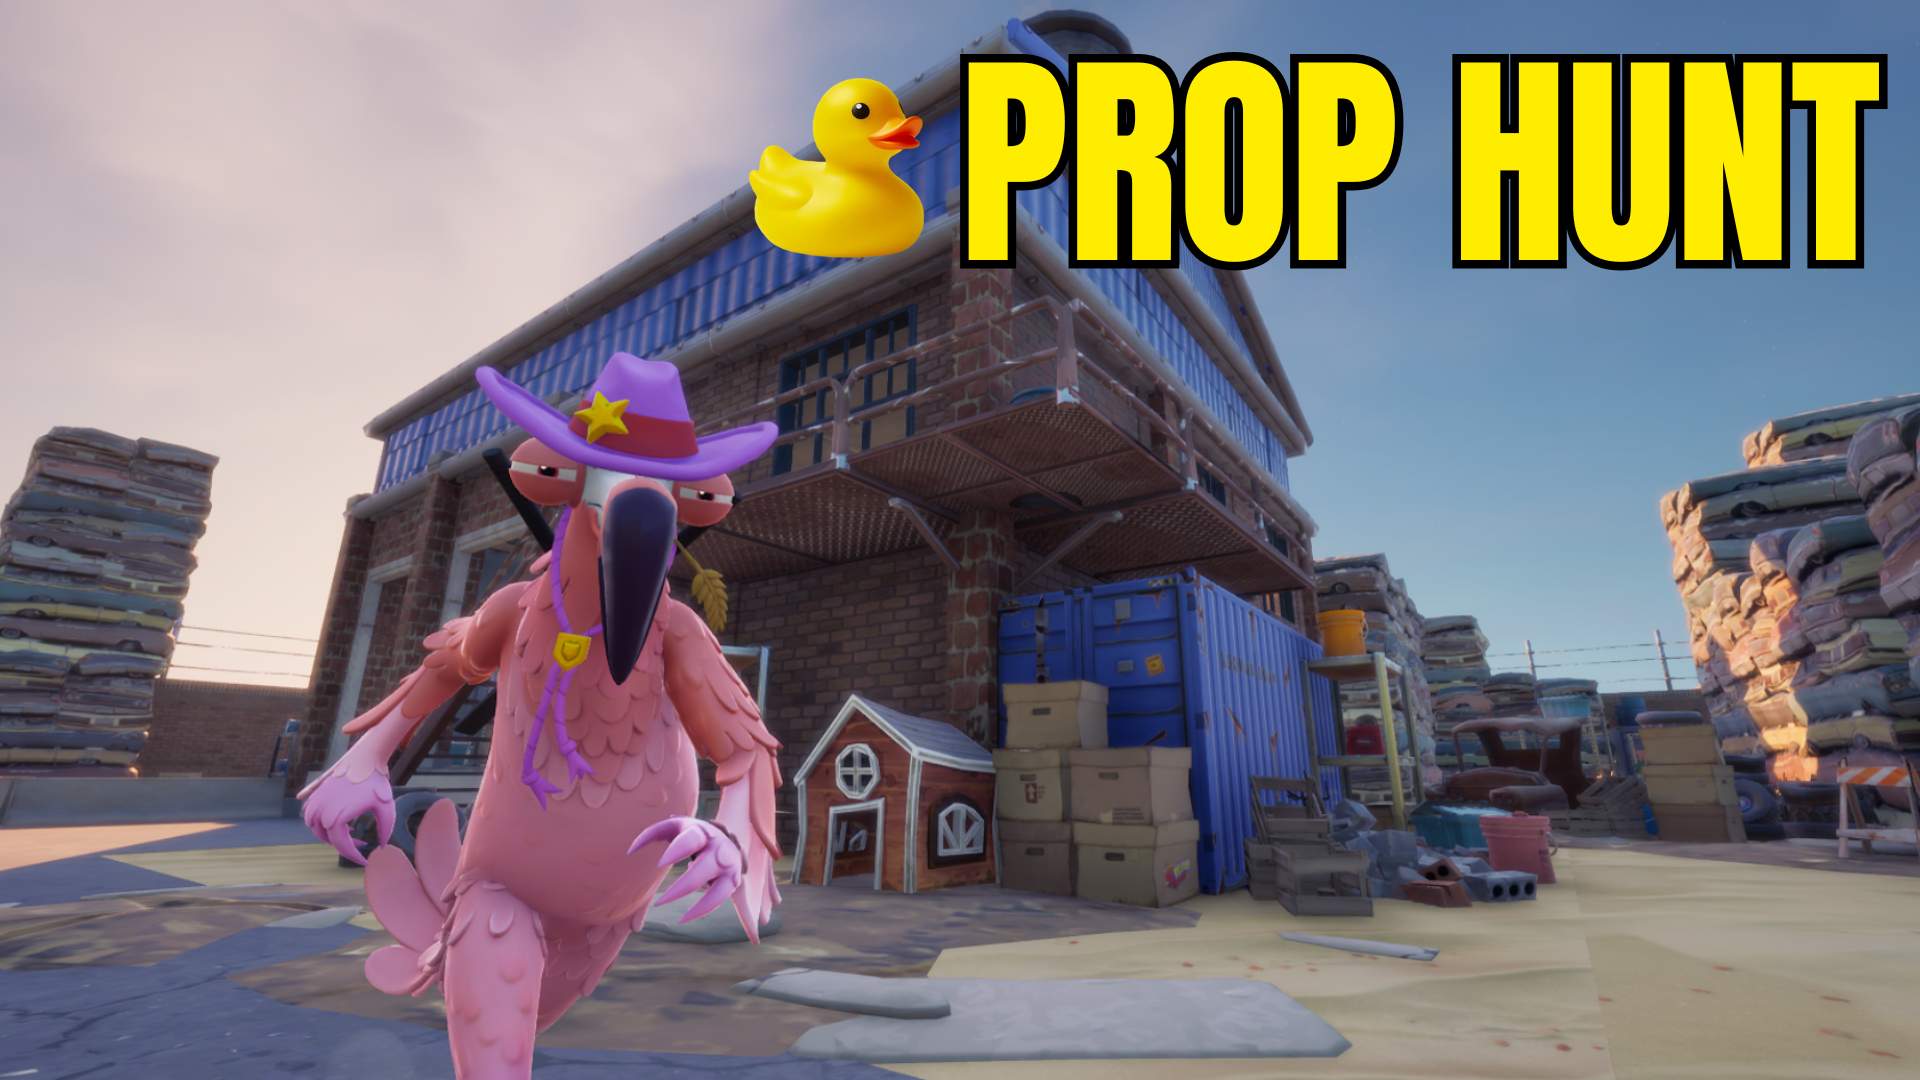 FIRST PERSON PROP HUNT 👀